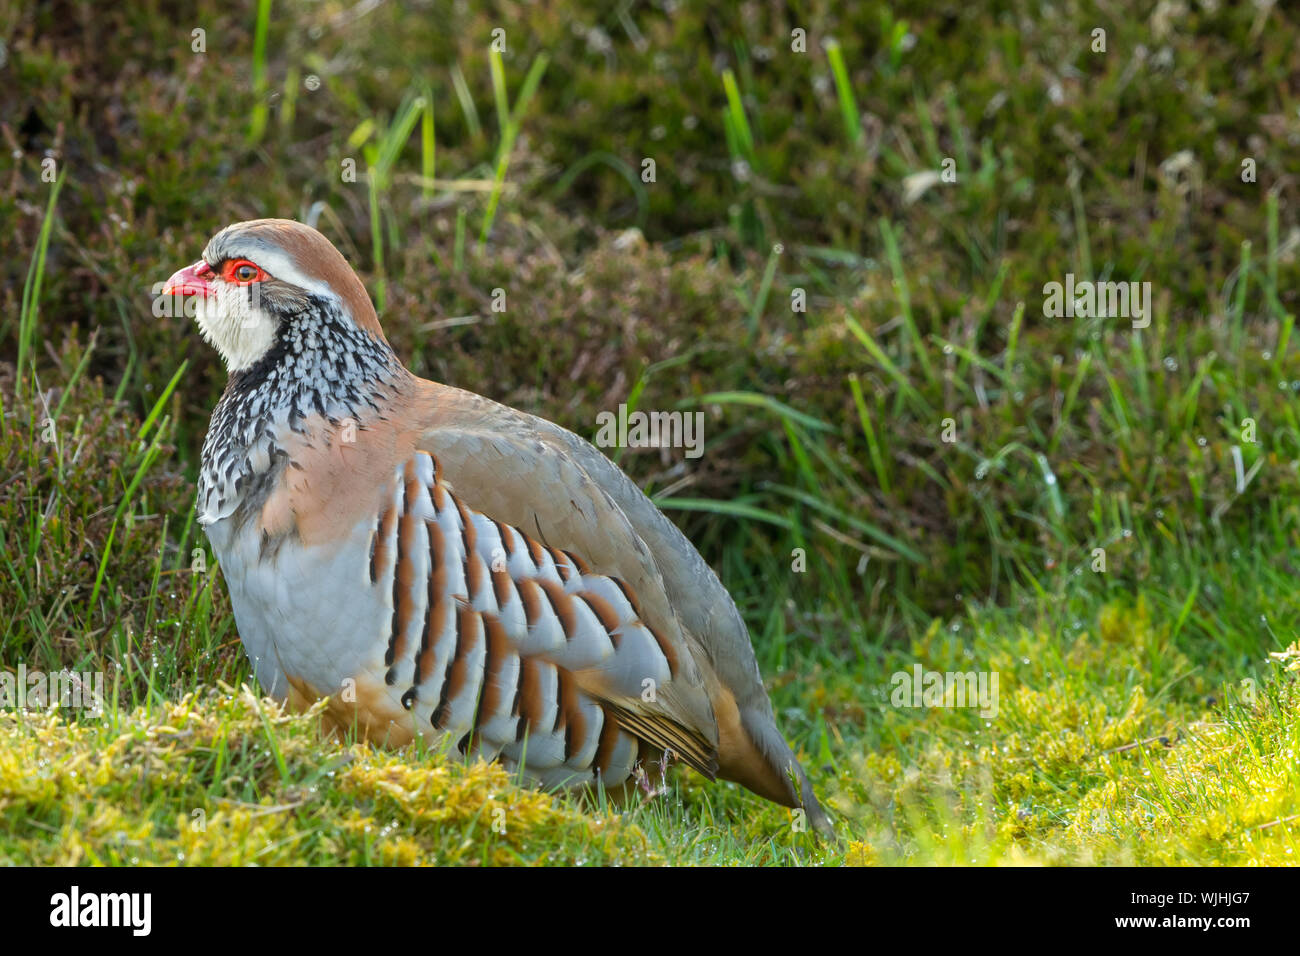 Partridge, red-legged partridge in natural, moorland habitat with early morning dew, close up.  Horizontal, landscape, space for copy. Stock Photo